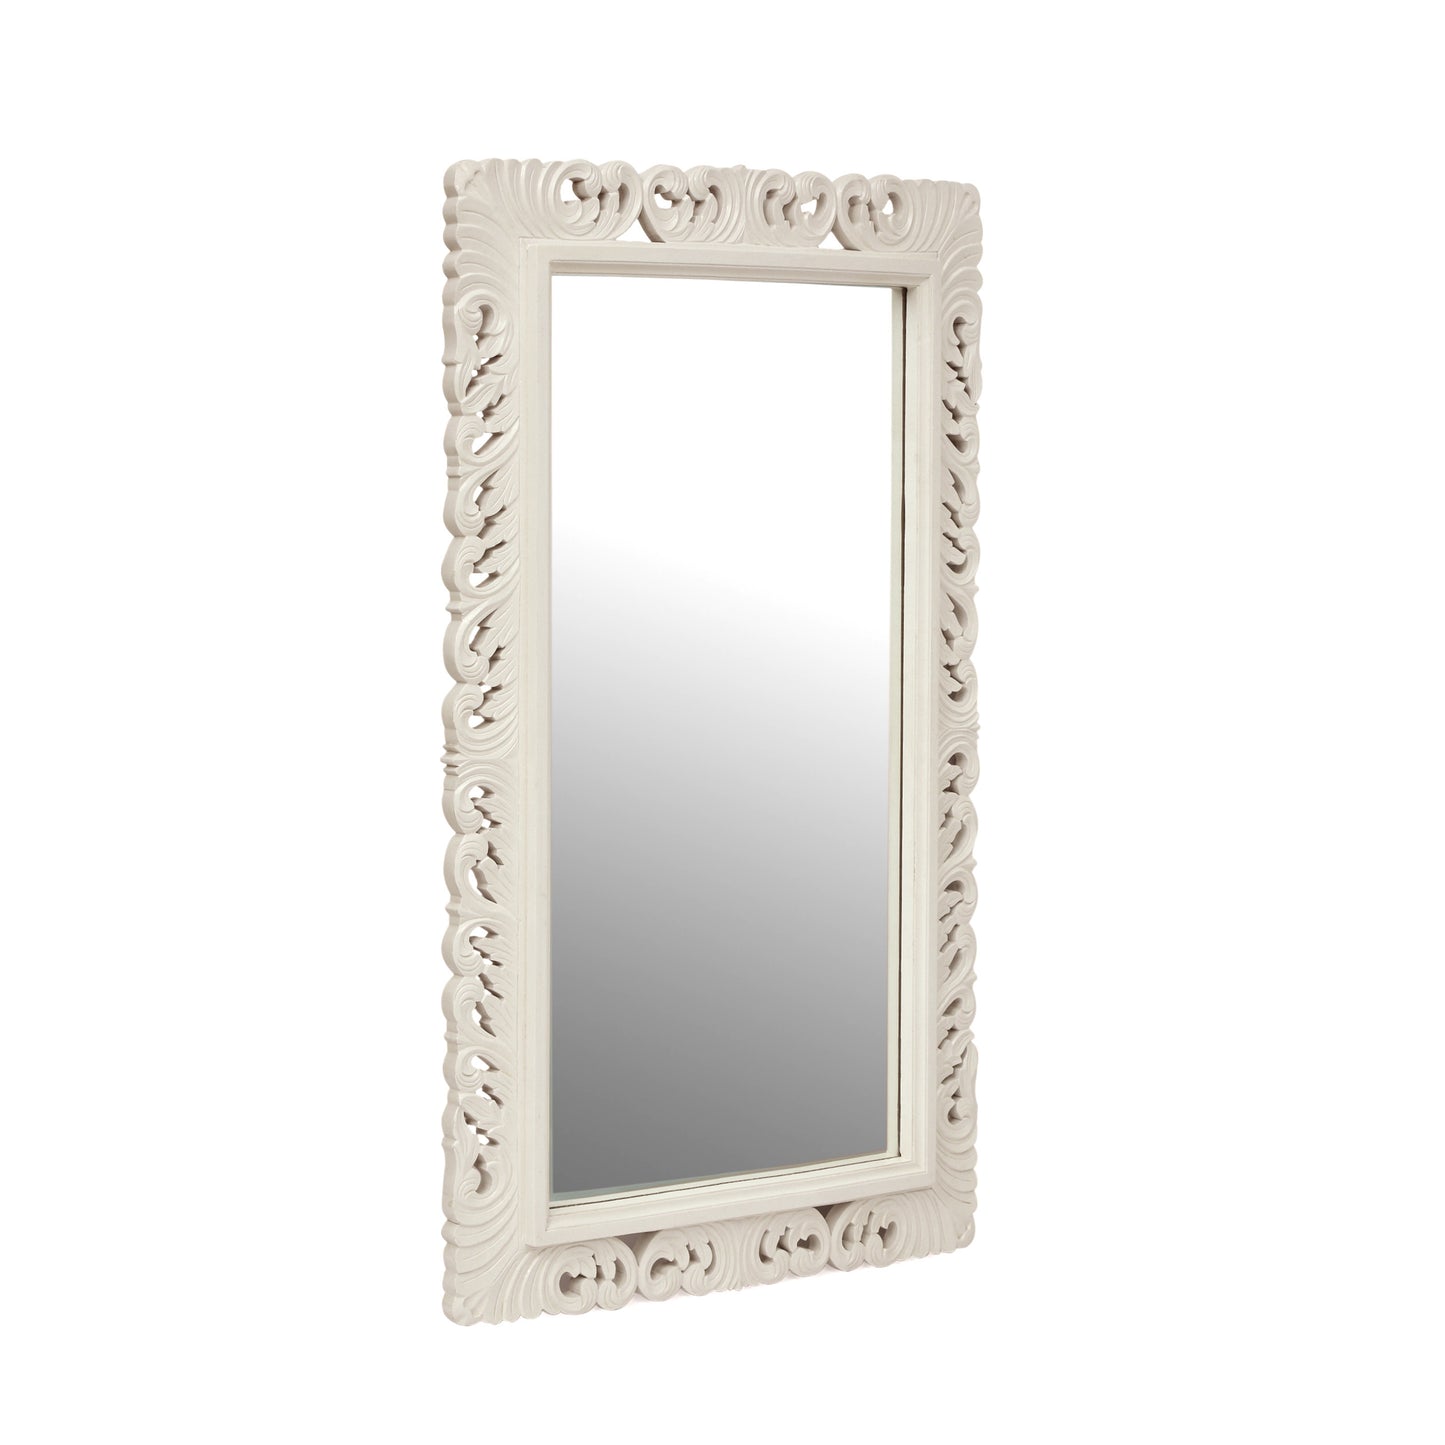 Negley Traditional Handcrafted Standing Mirror, White